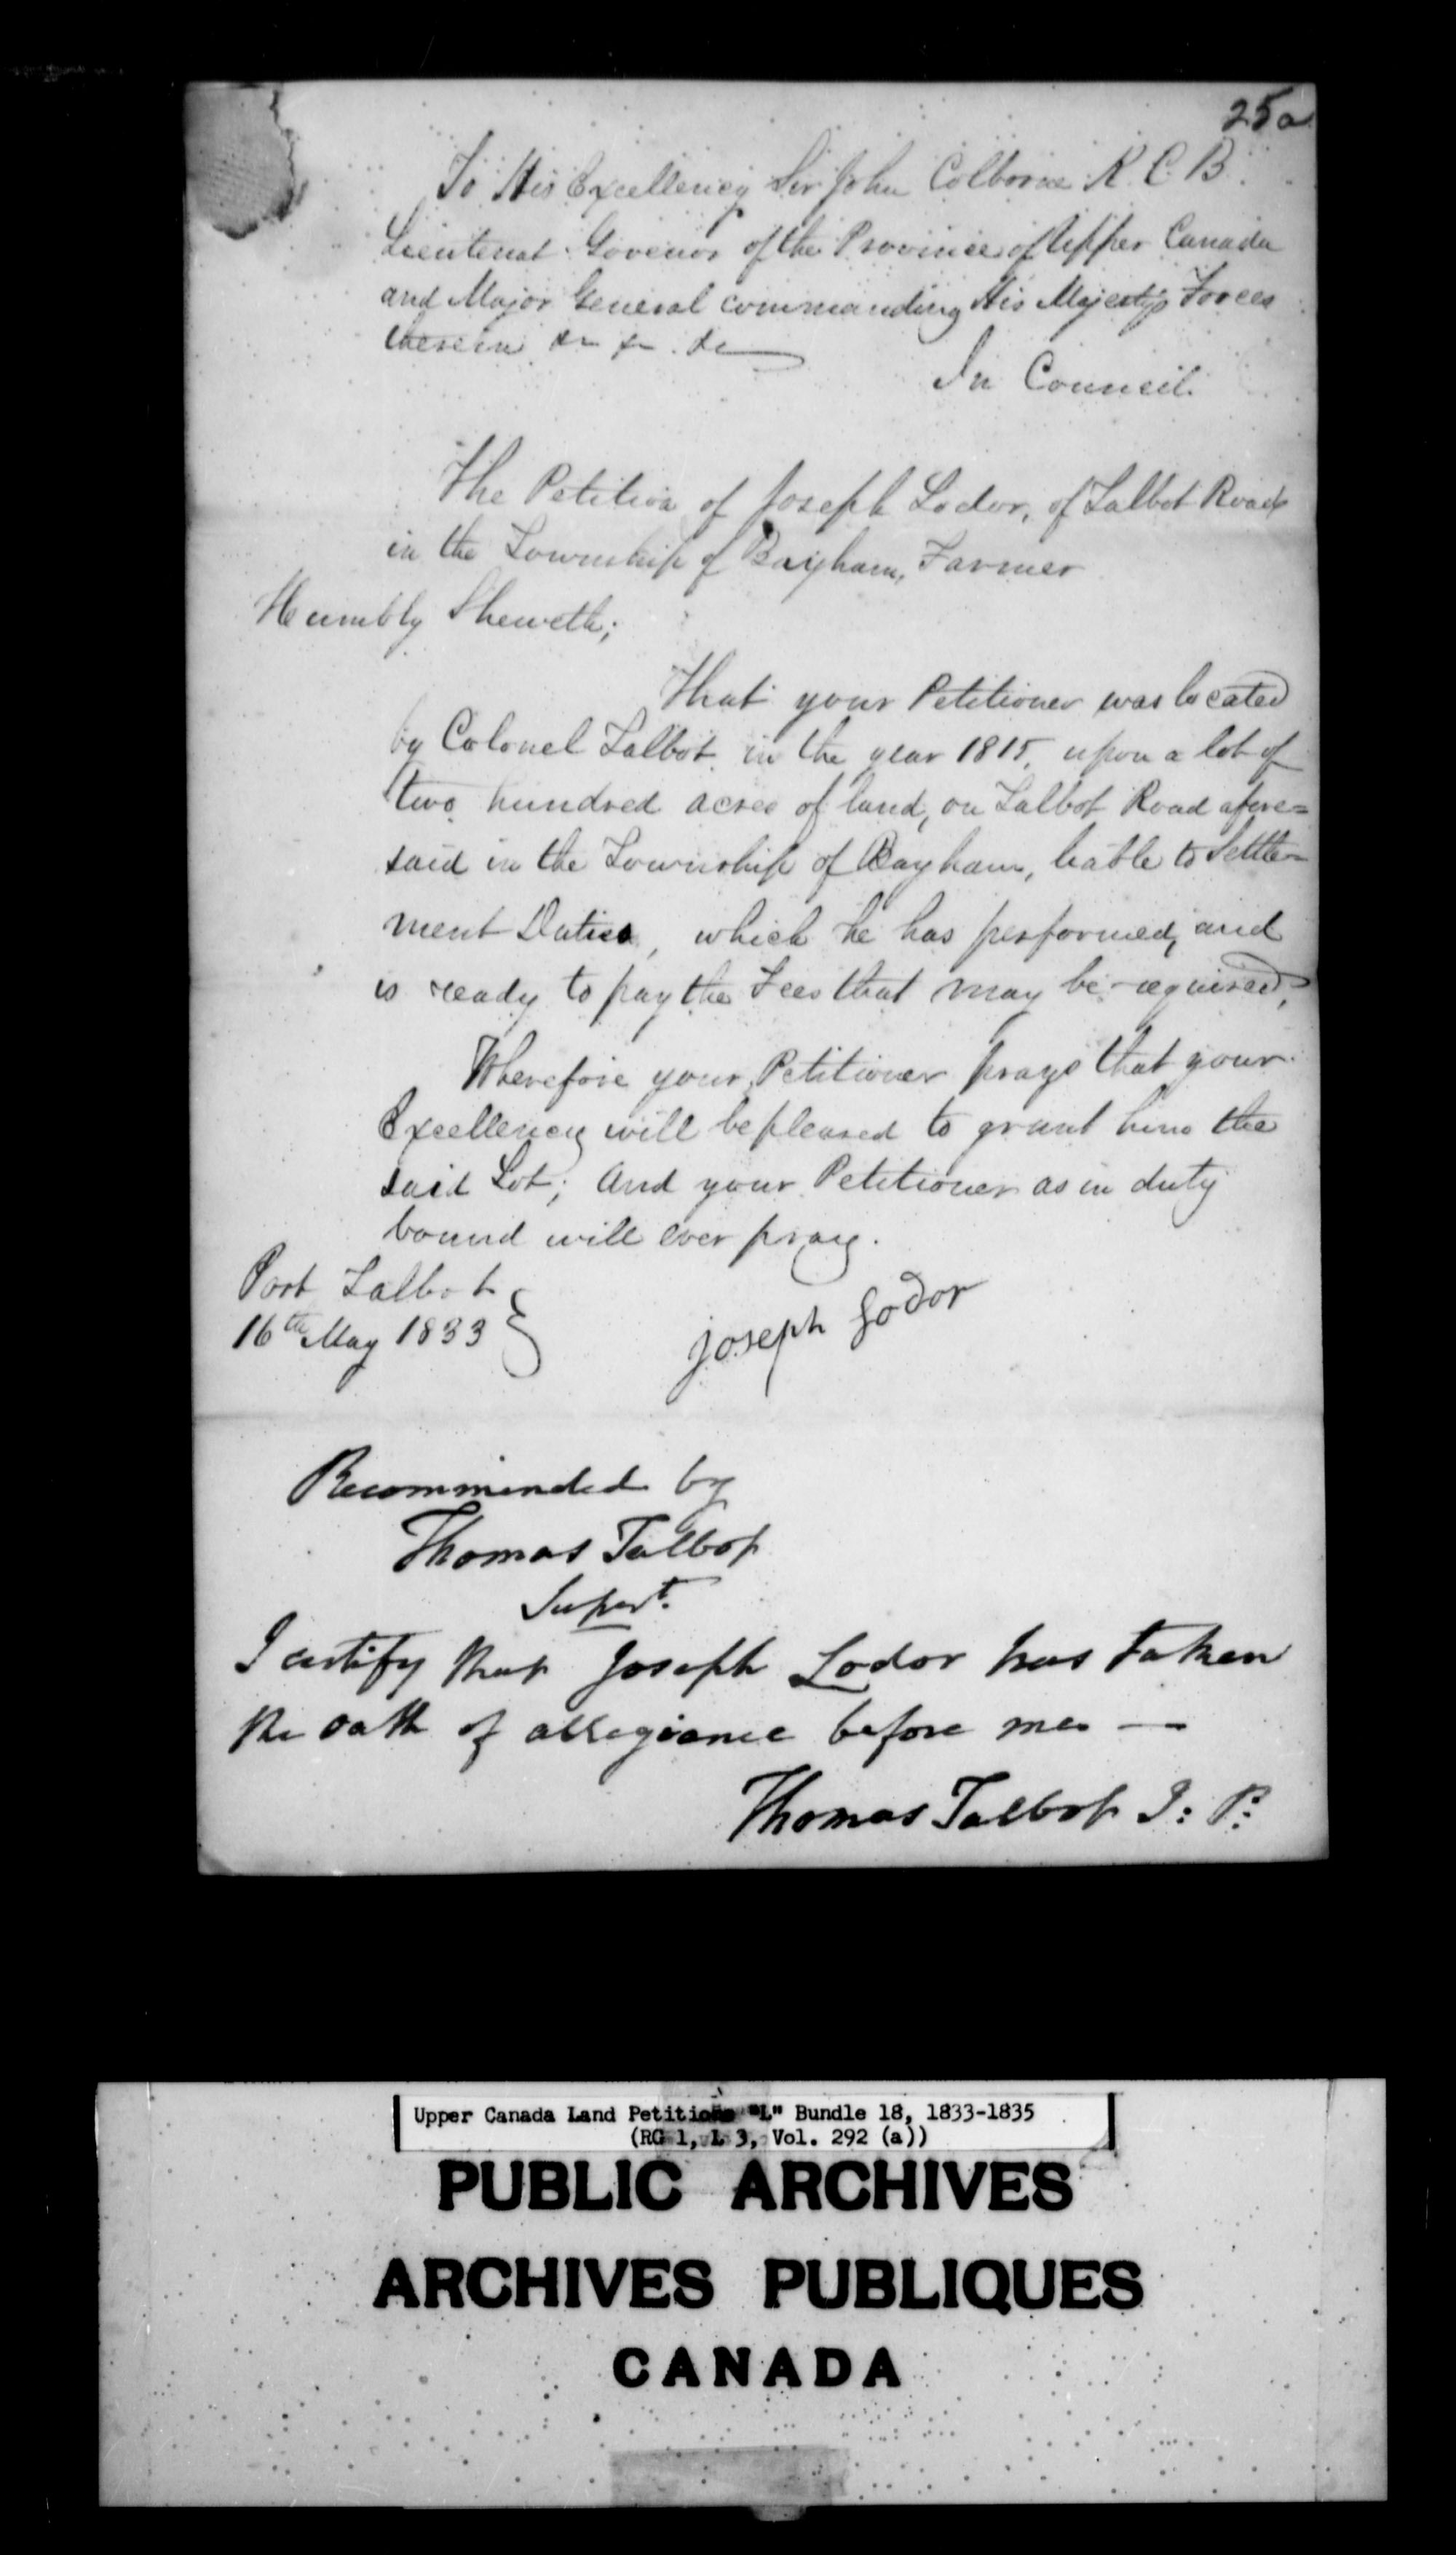 Title: Upper Canada Land Petitions (1763-1865) - Mikan Number: 205131 - Microform: c-2130